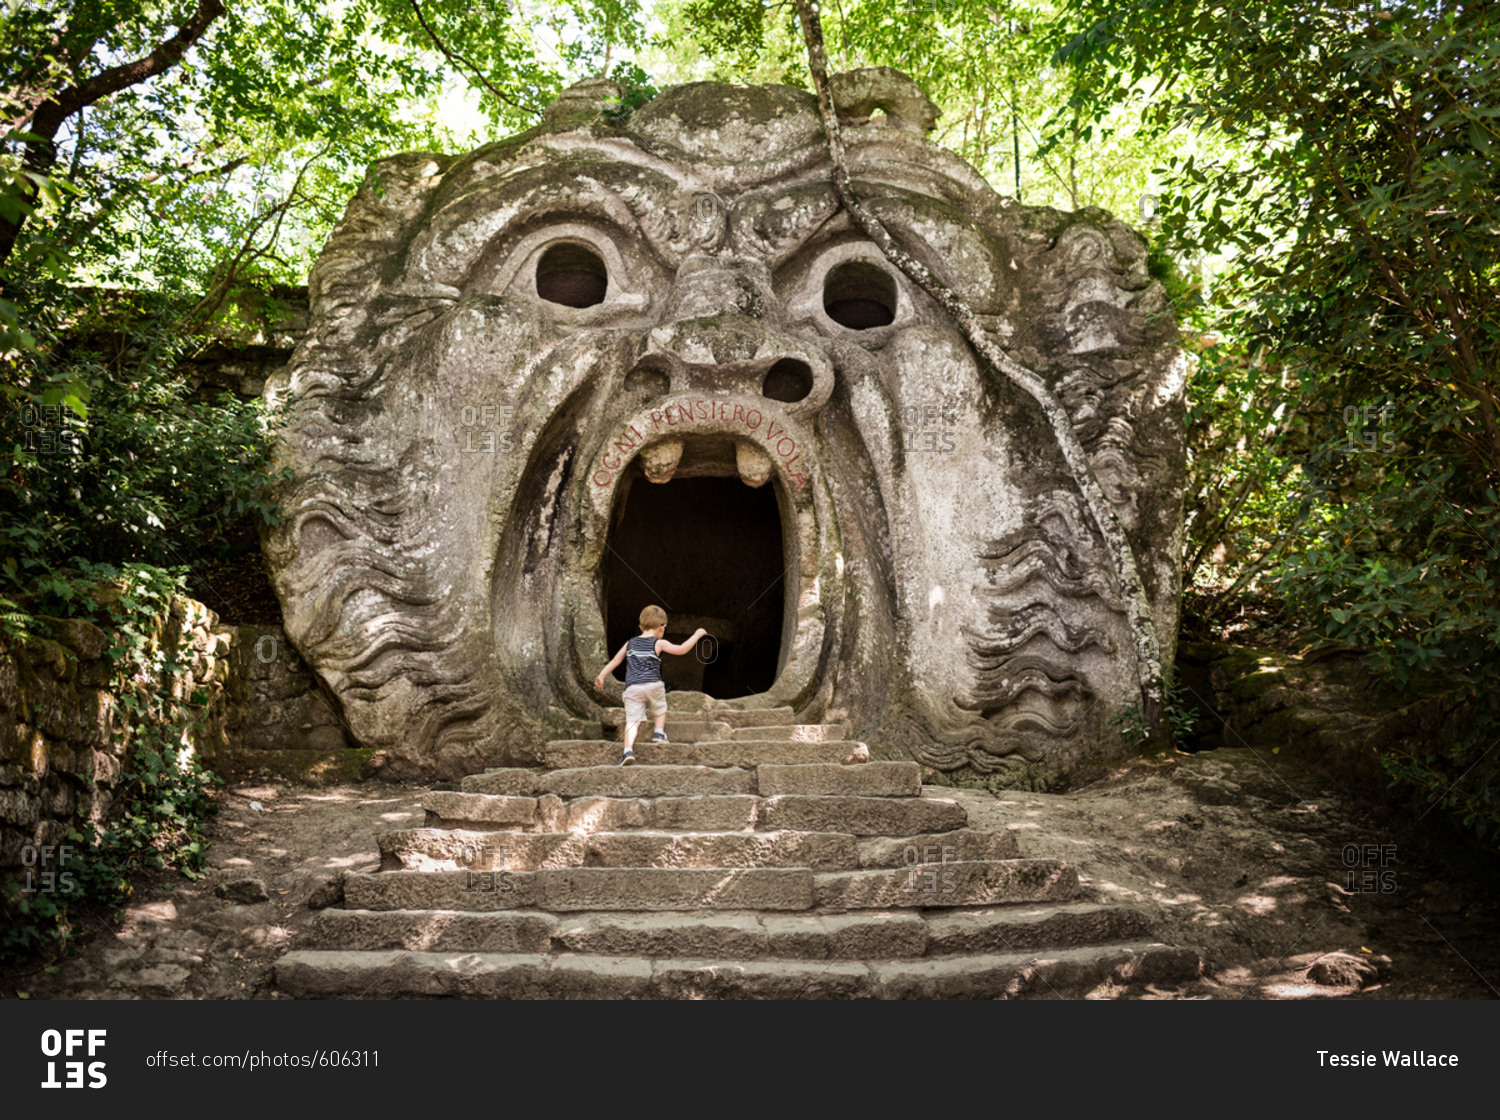 Boy walking into mouth of stone sculpture